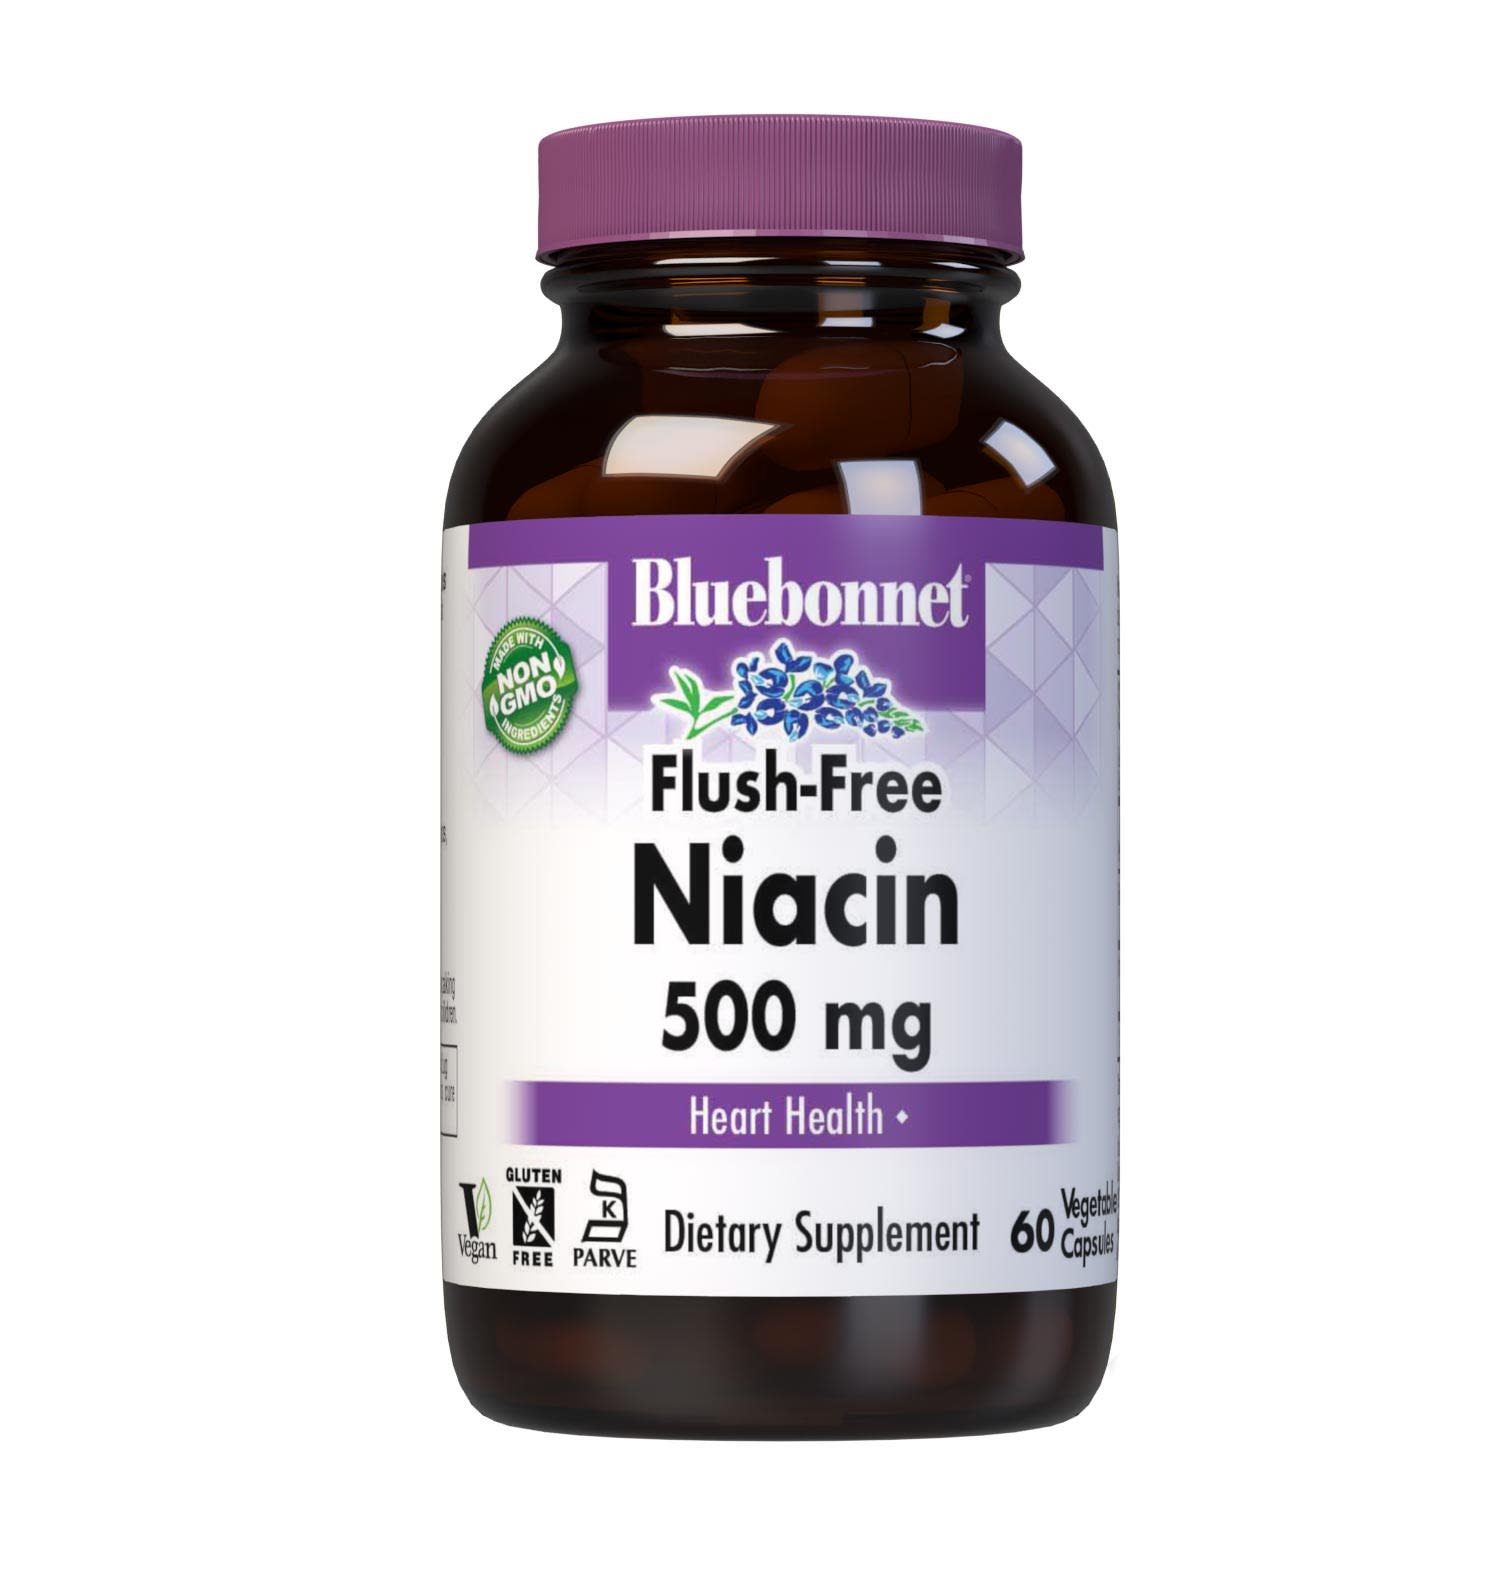 Bluebonnet’s Flush-Free Niacin 500 mg Vegetable Capsules are formulated with crystalline flush-free niacin from inositol hexanicotinate to help support cardiovascular health. #size_60 count